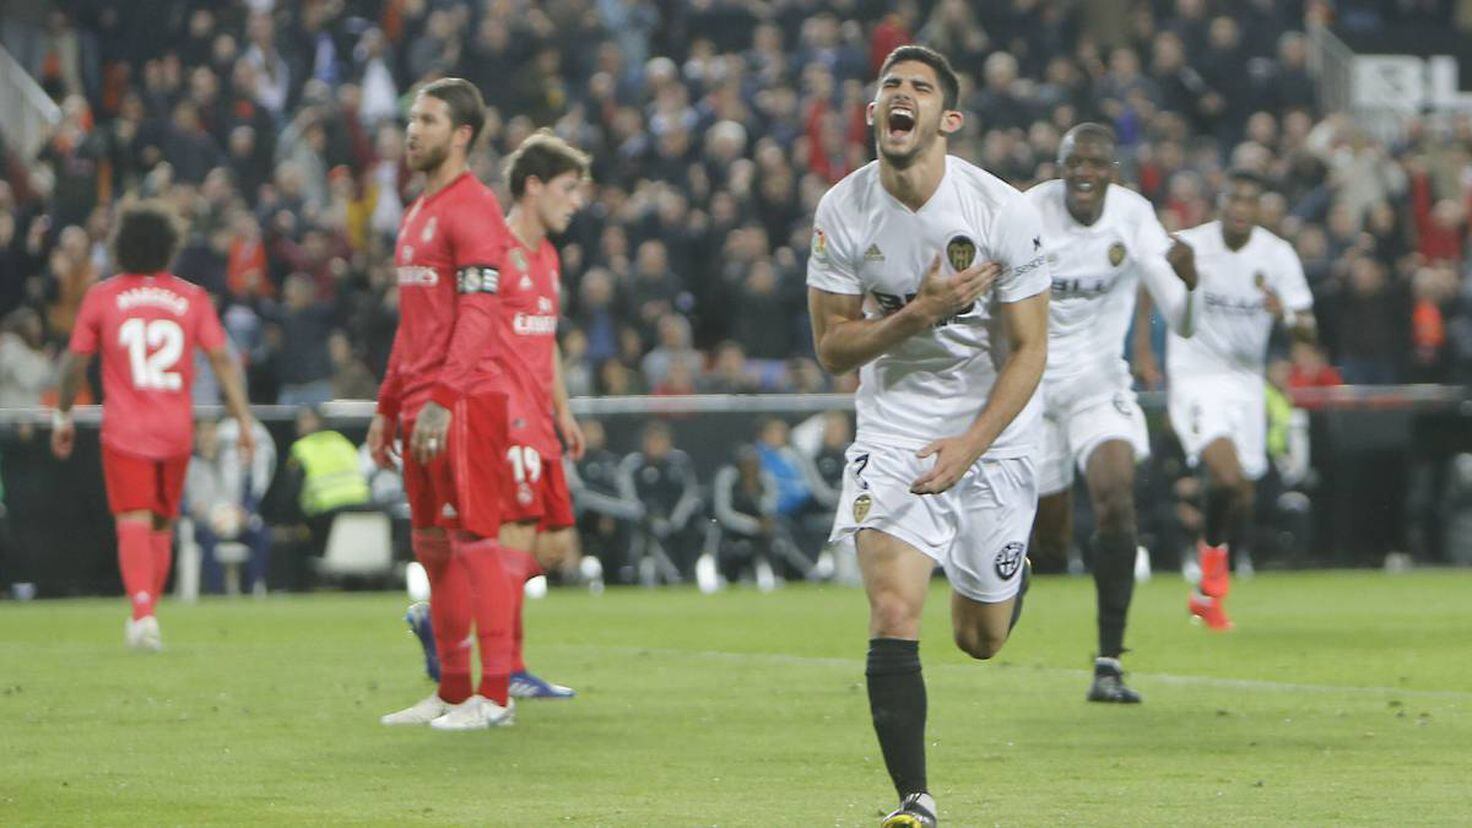 Valencia 2-1 Real Madrid. The winning streak finally came to an end